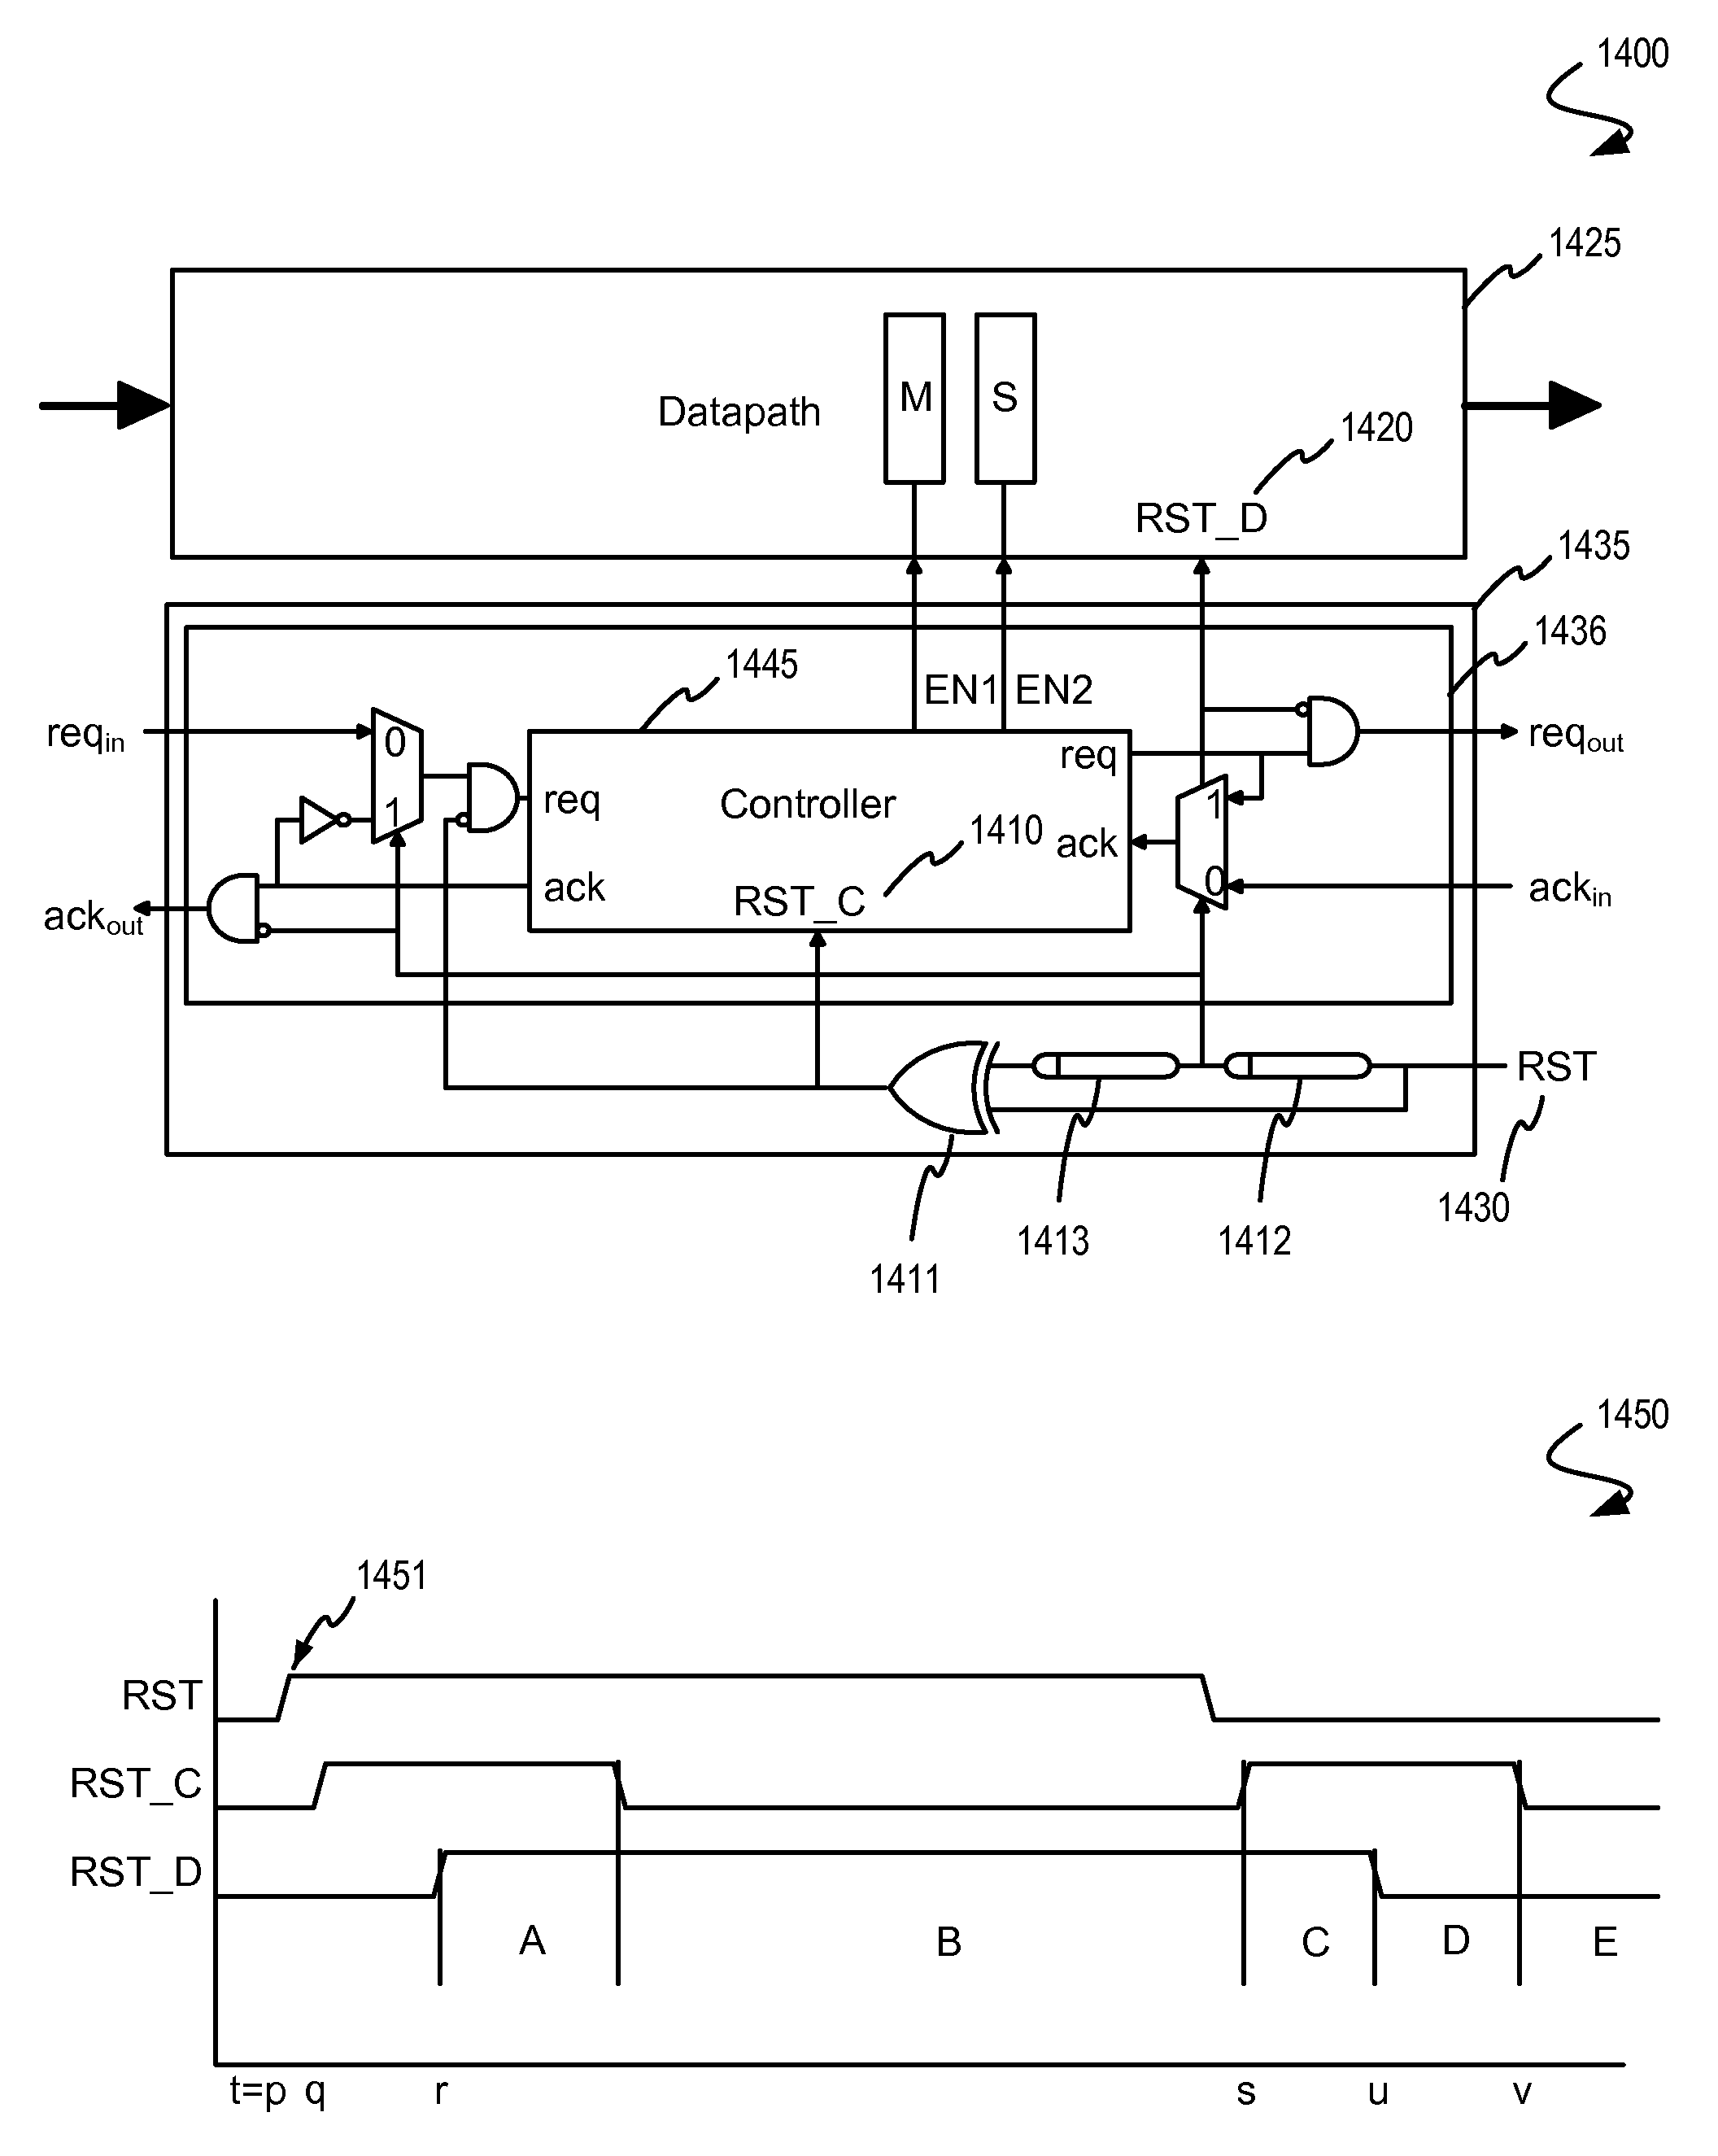 Variability-aware scheme for asynchronous circuit initialization